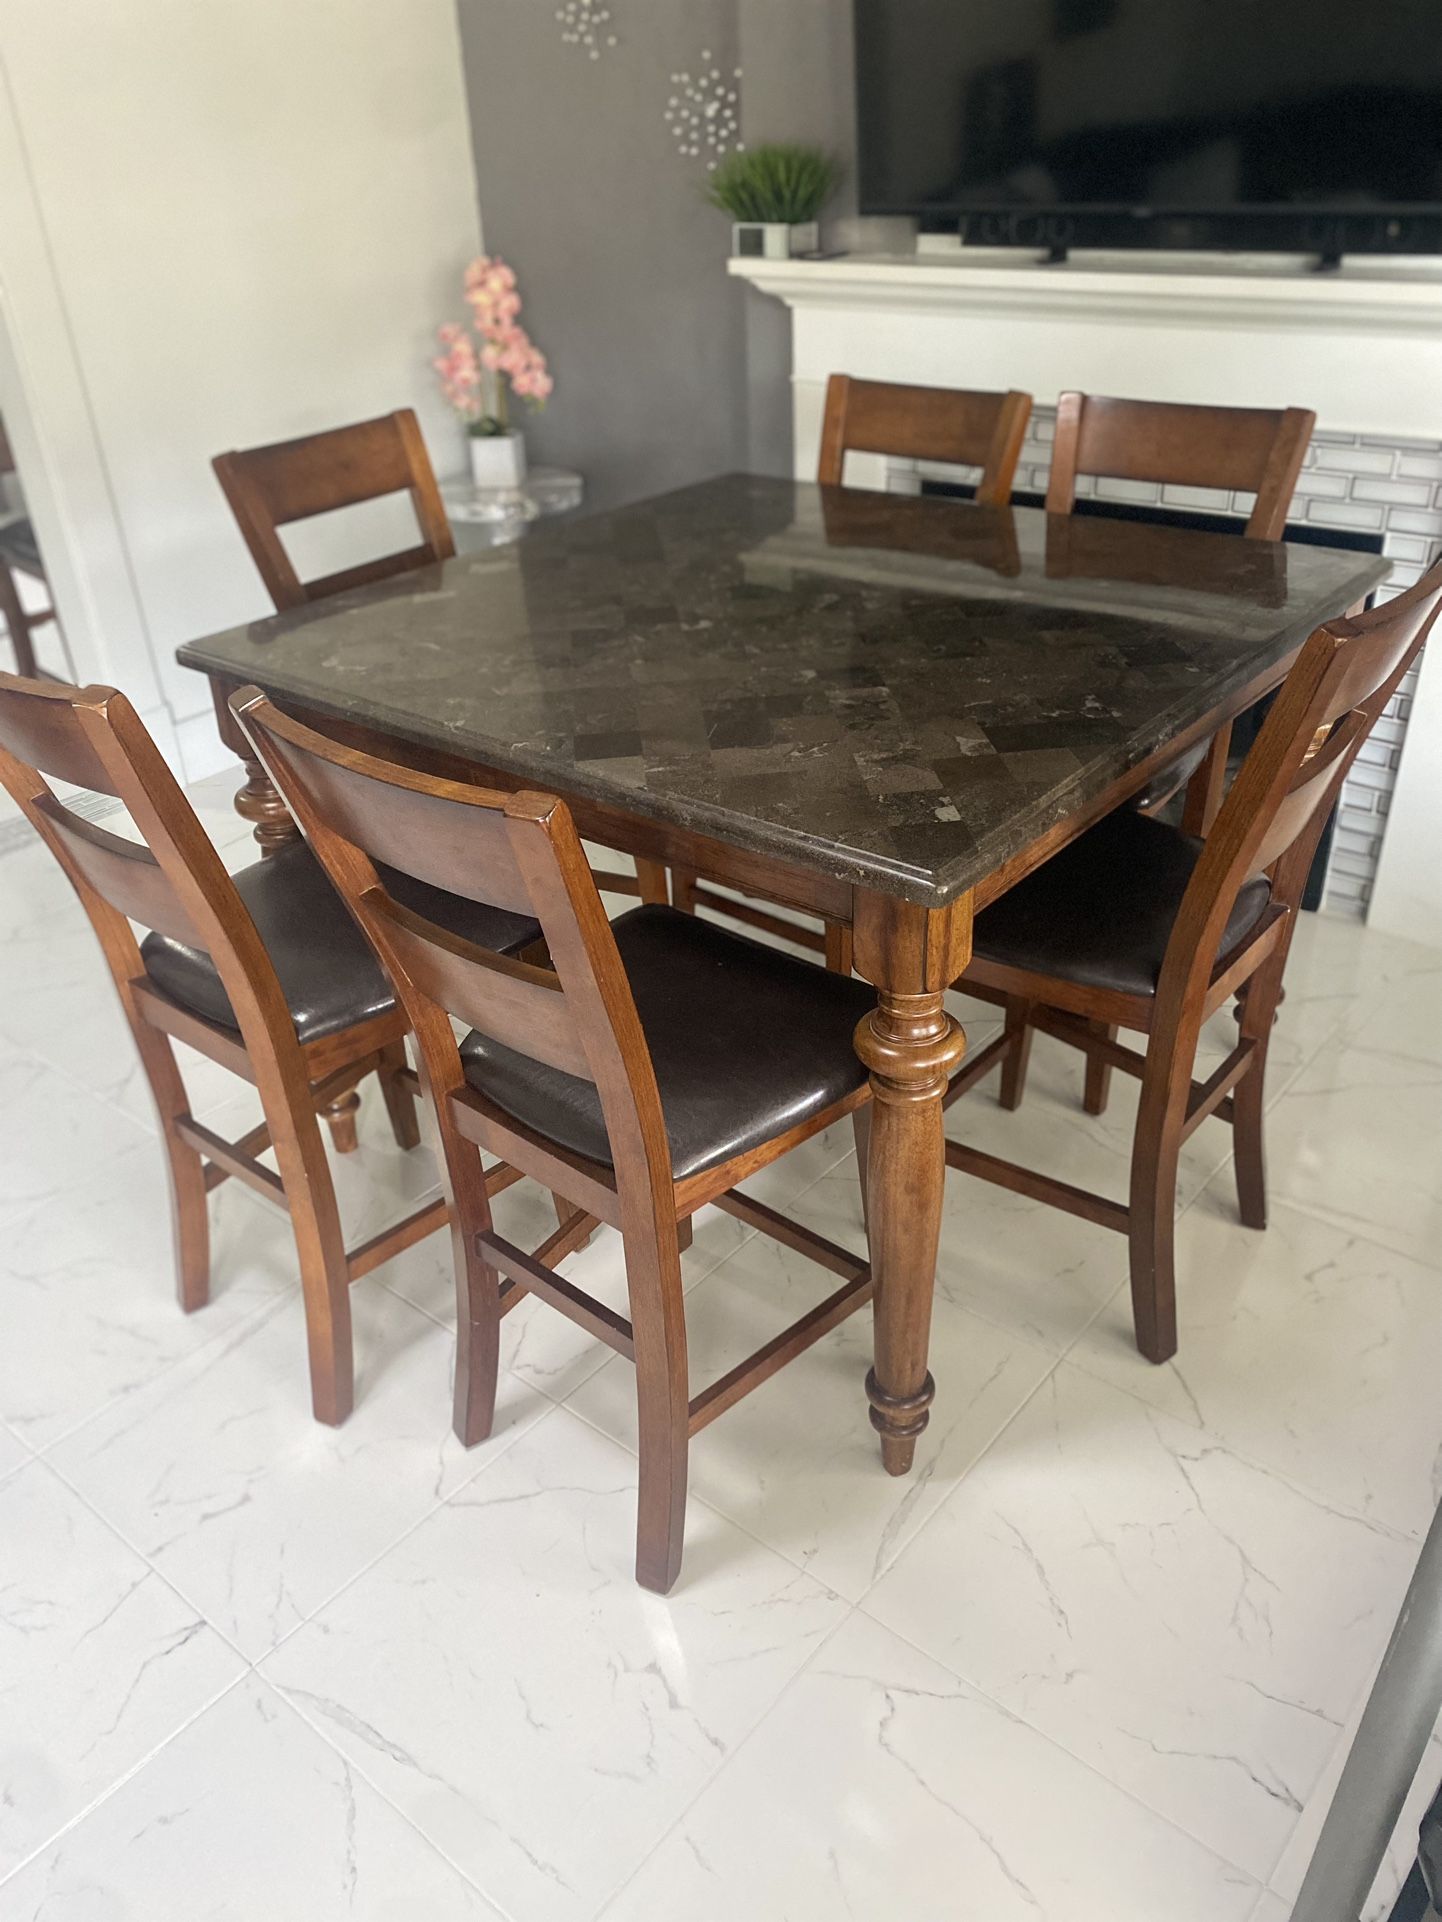 Granite 6 Chair Table Comes With Extra Chair 7 Chairs In Total